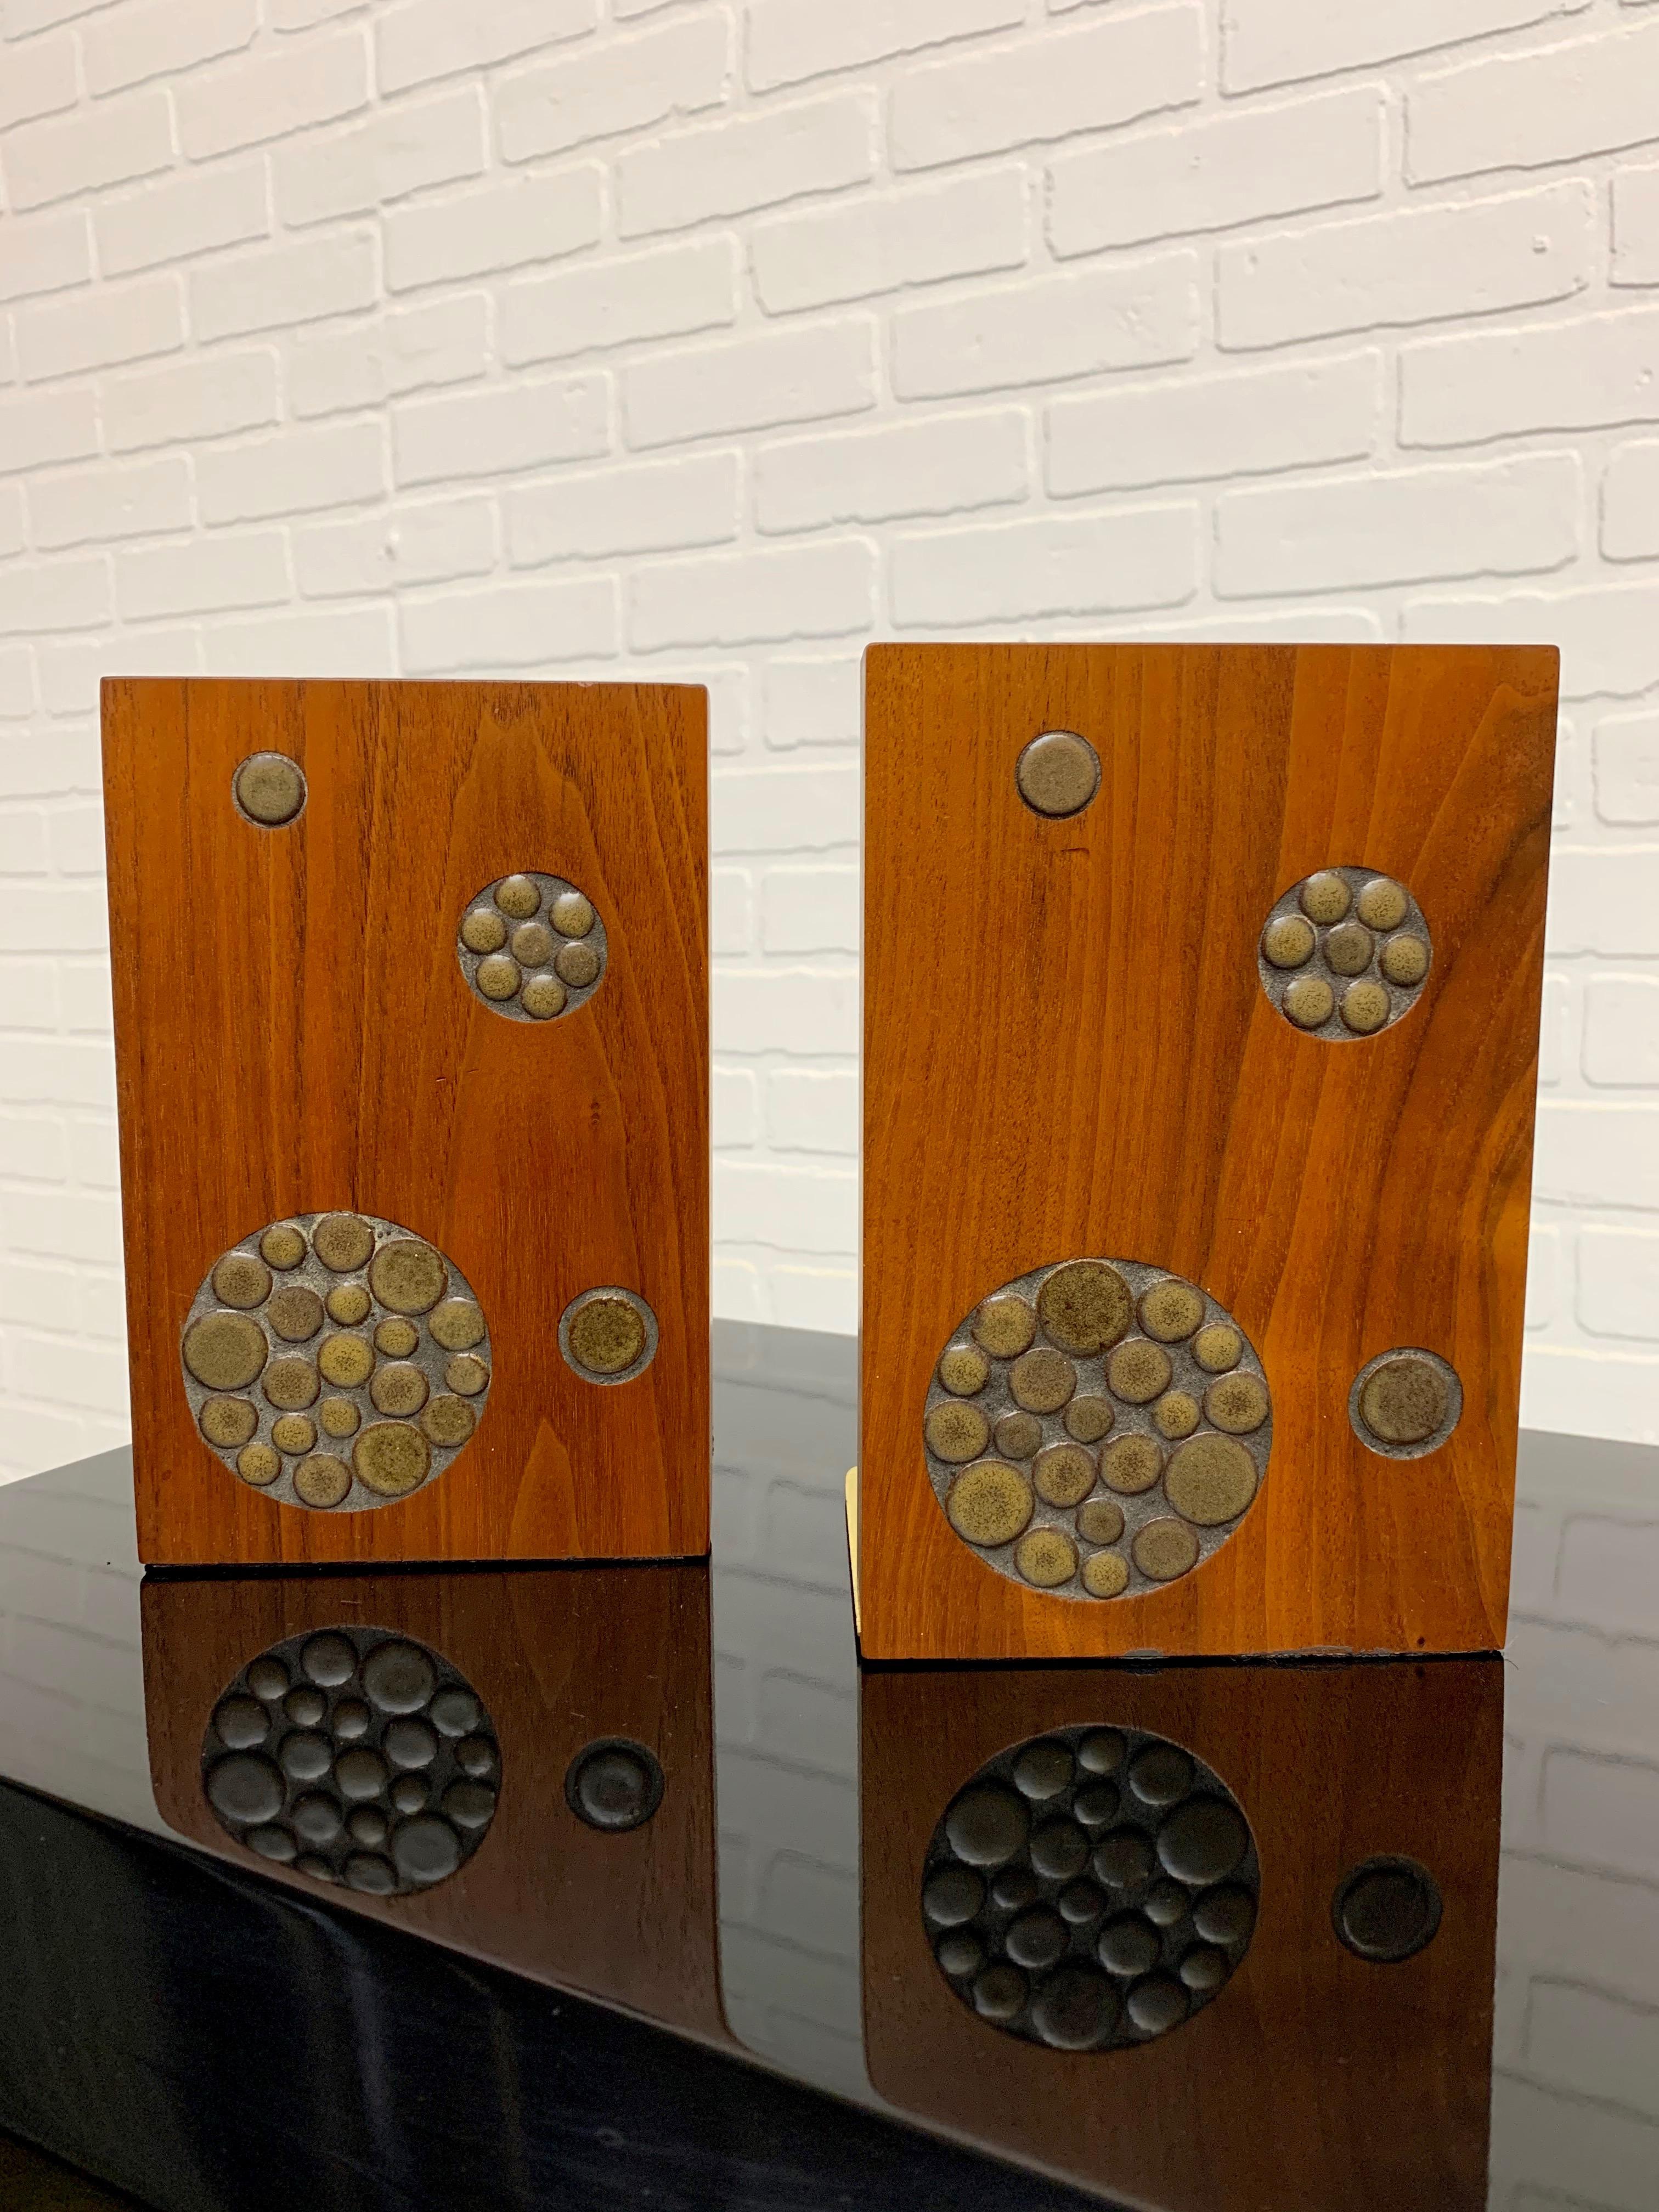 Solid walnut with circular inlaid tiles make for a stunning pair of bookends.